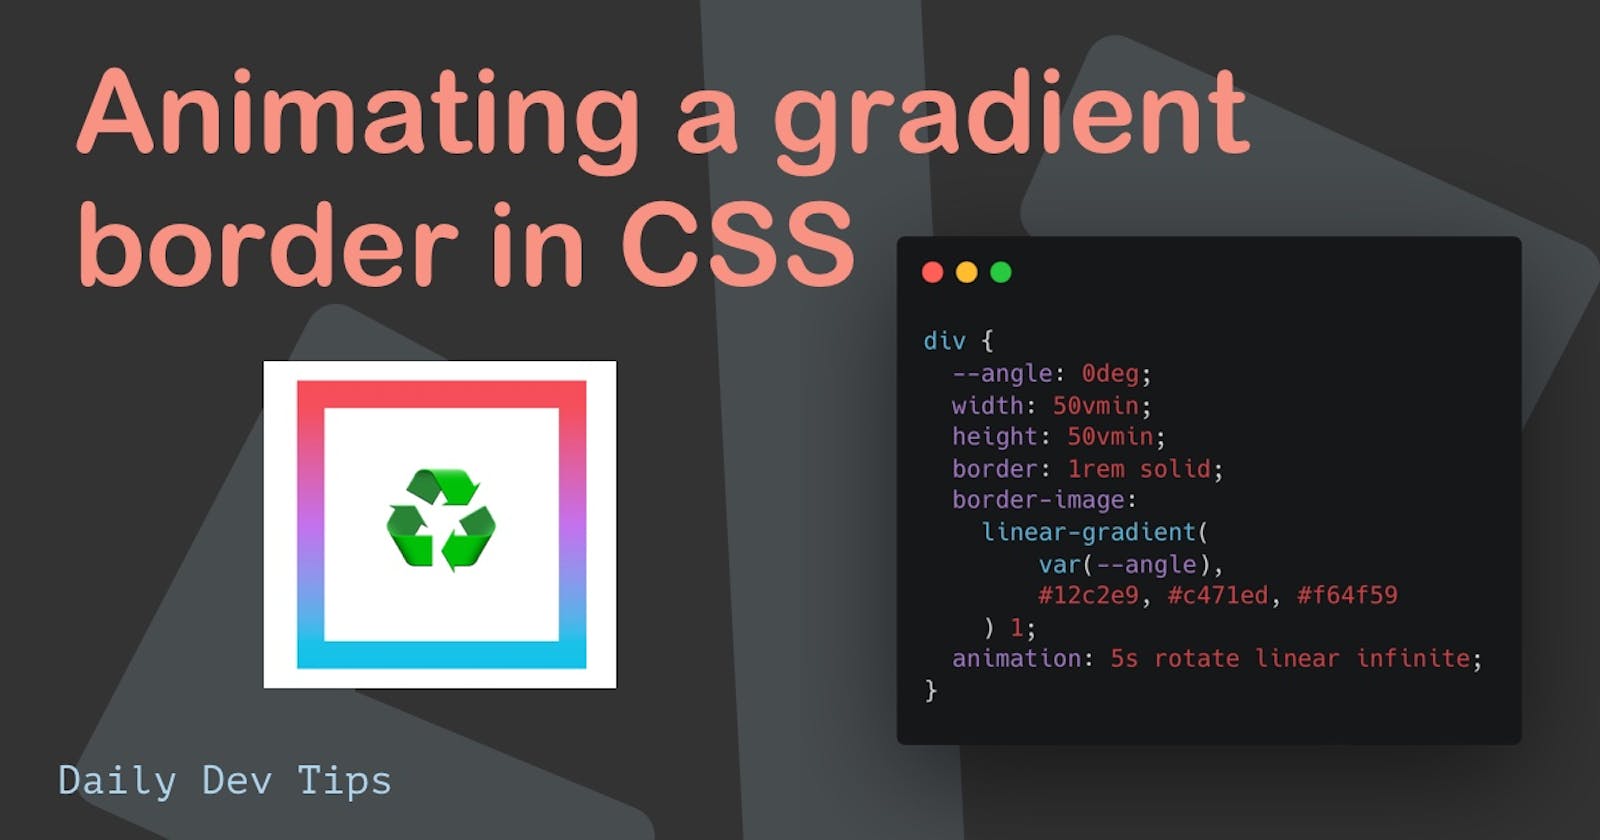 Animating a gradient border in CSS